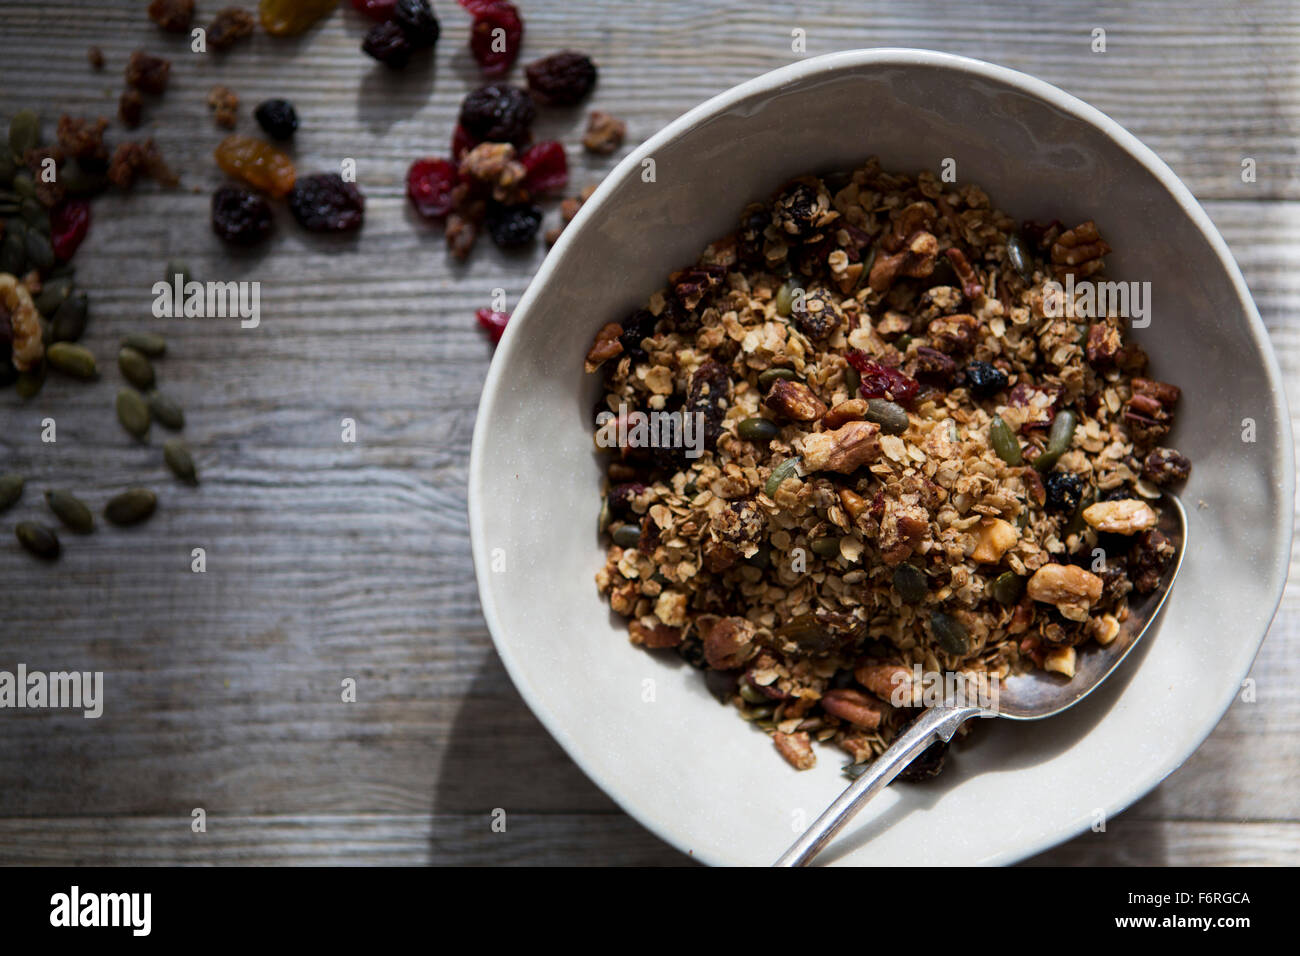 Bowl of Homemade Granola with Nuts, Seeds, Raisins & Cranberries Stock Photo